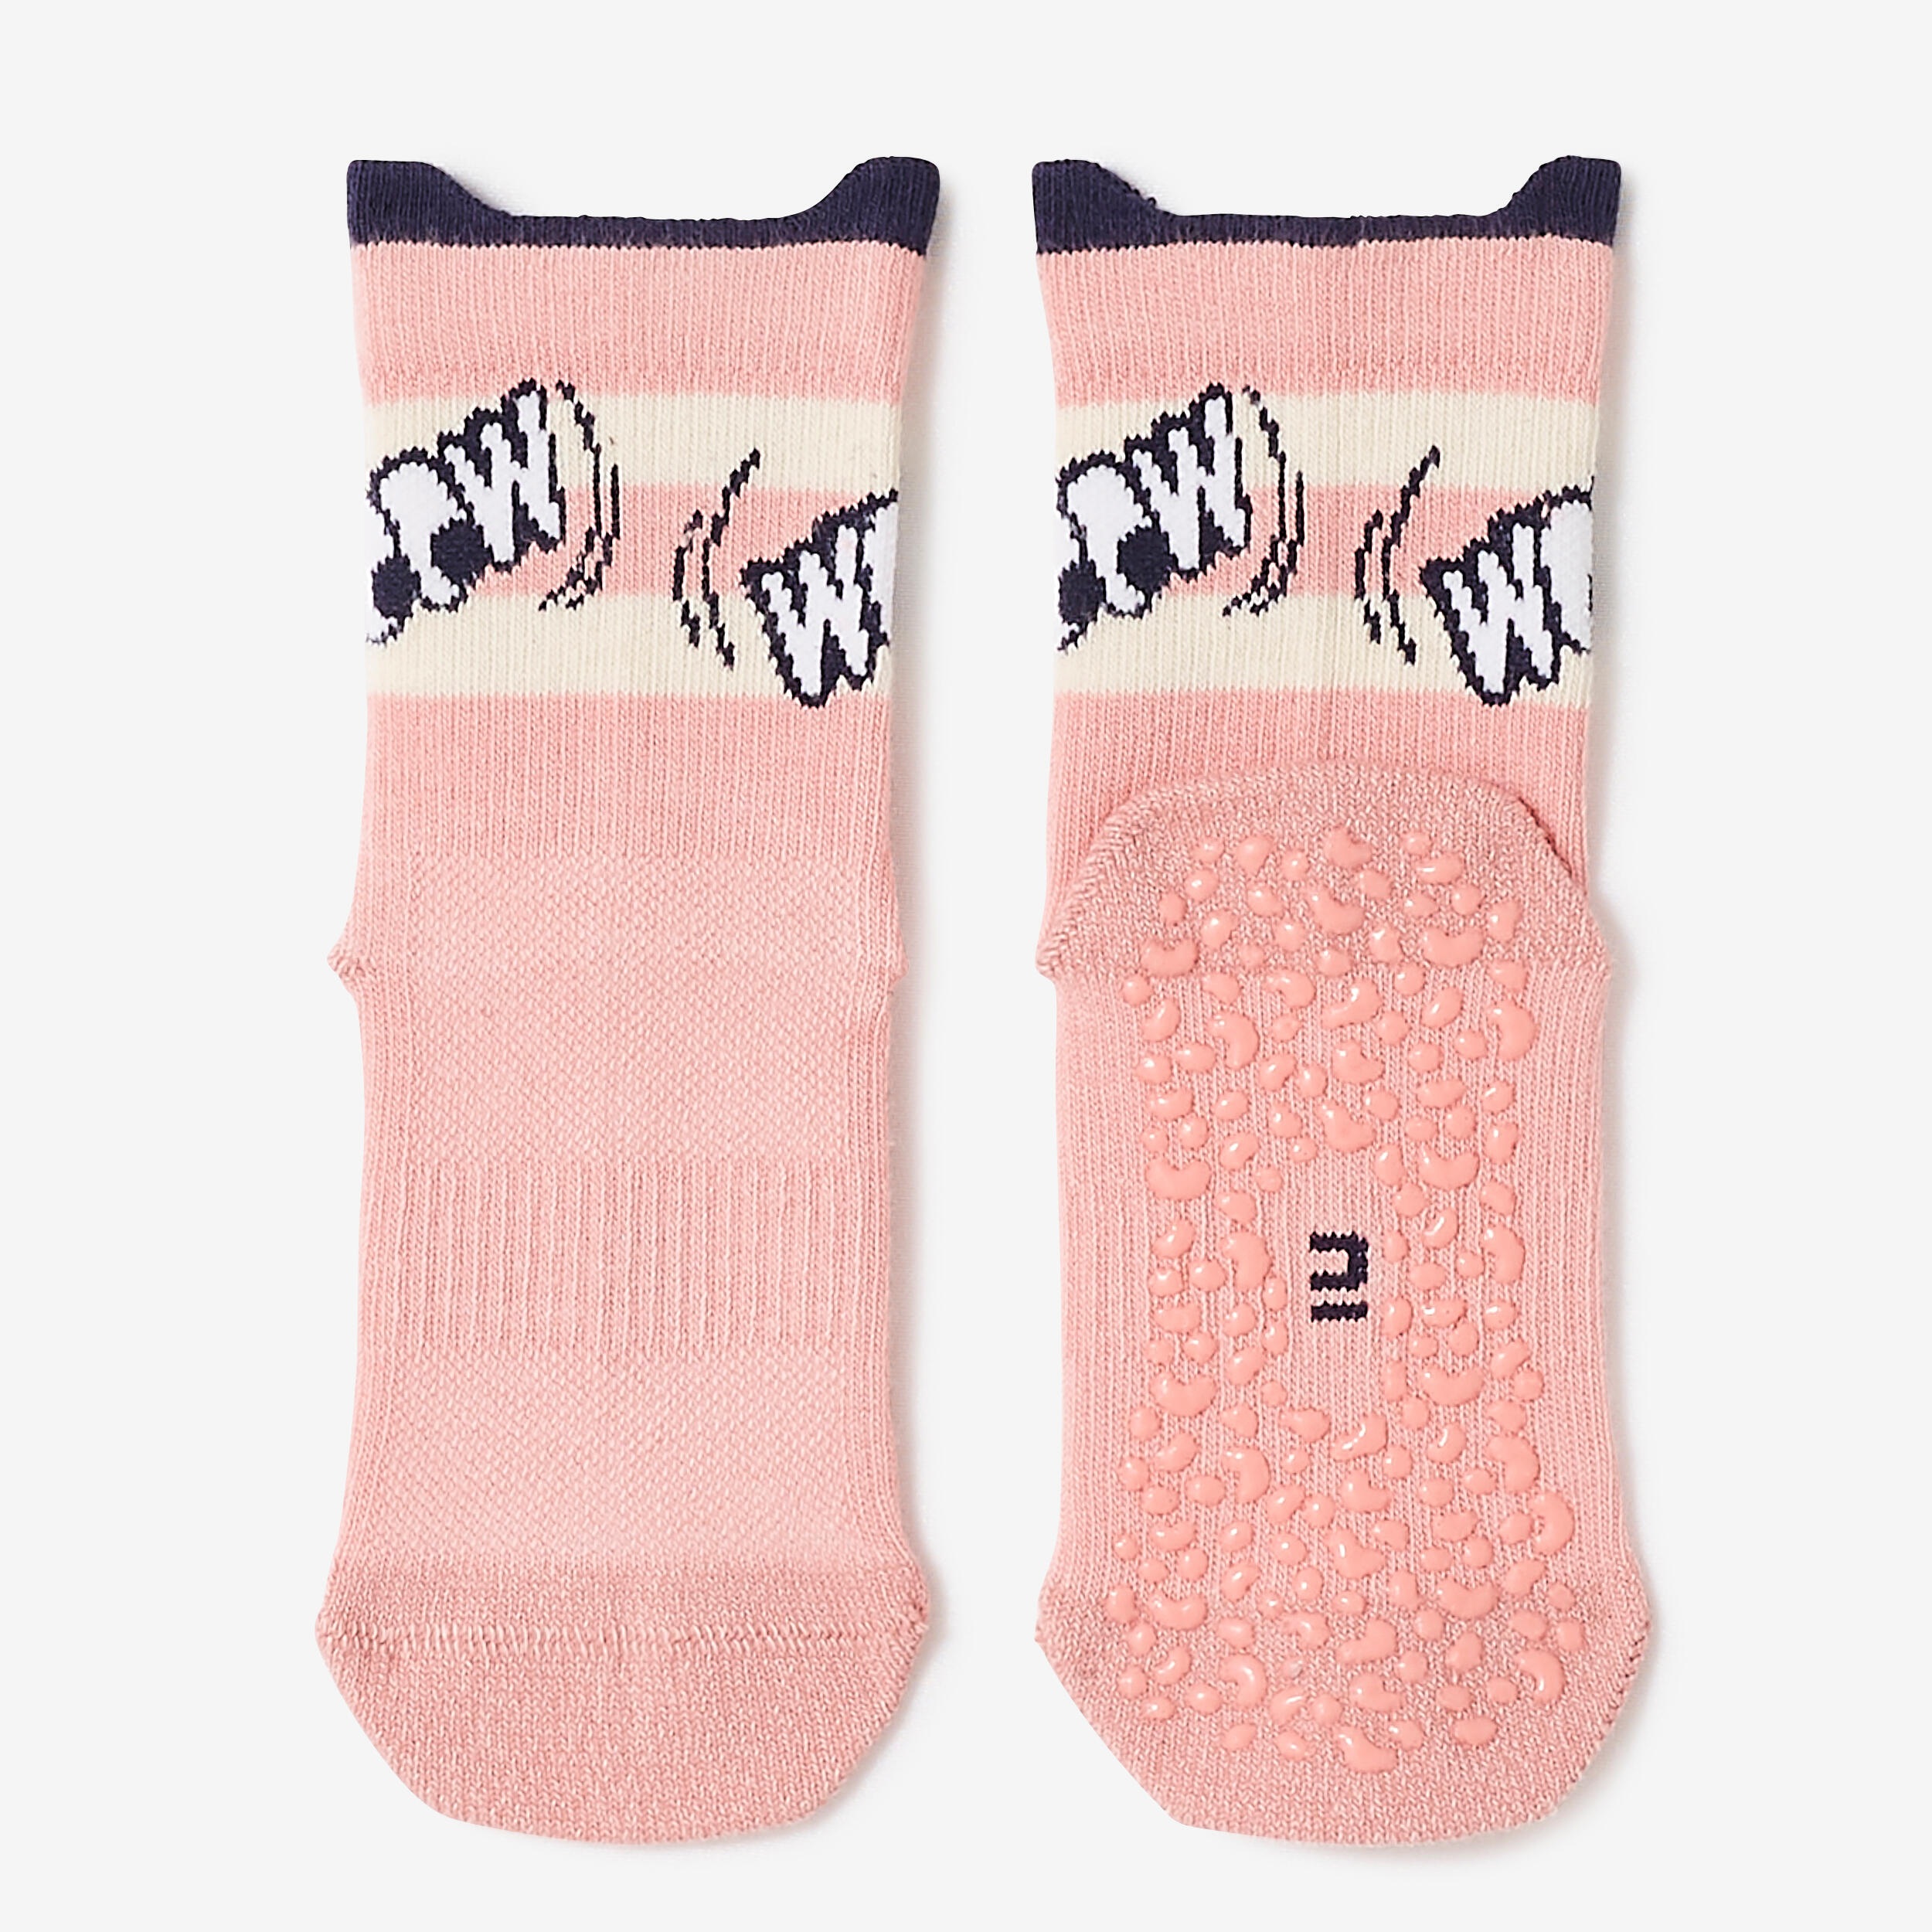 Kids' Non-Slip Mid-High Socks 600 - Pink with Pattern 2/2